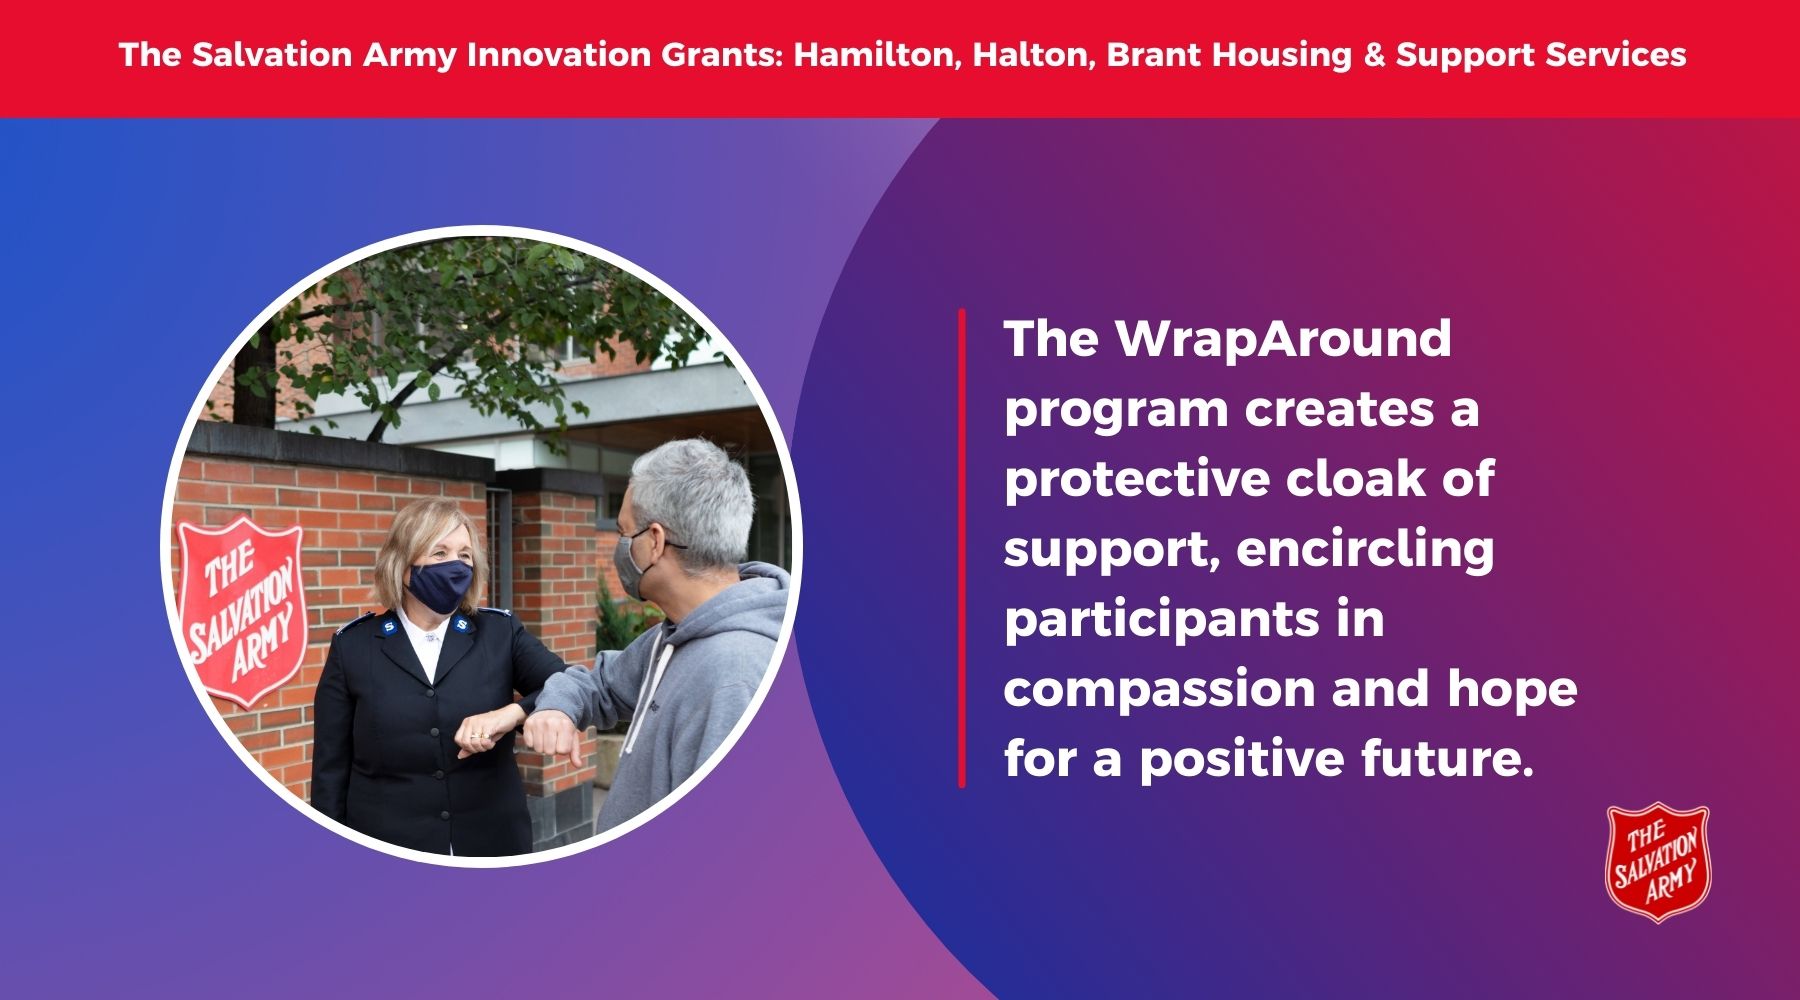 Community WrapAround Program Empowers Clients to Build a Brighter